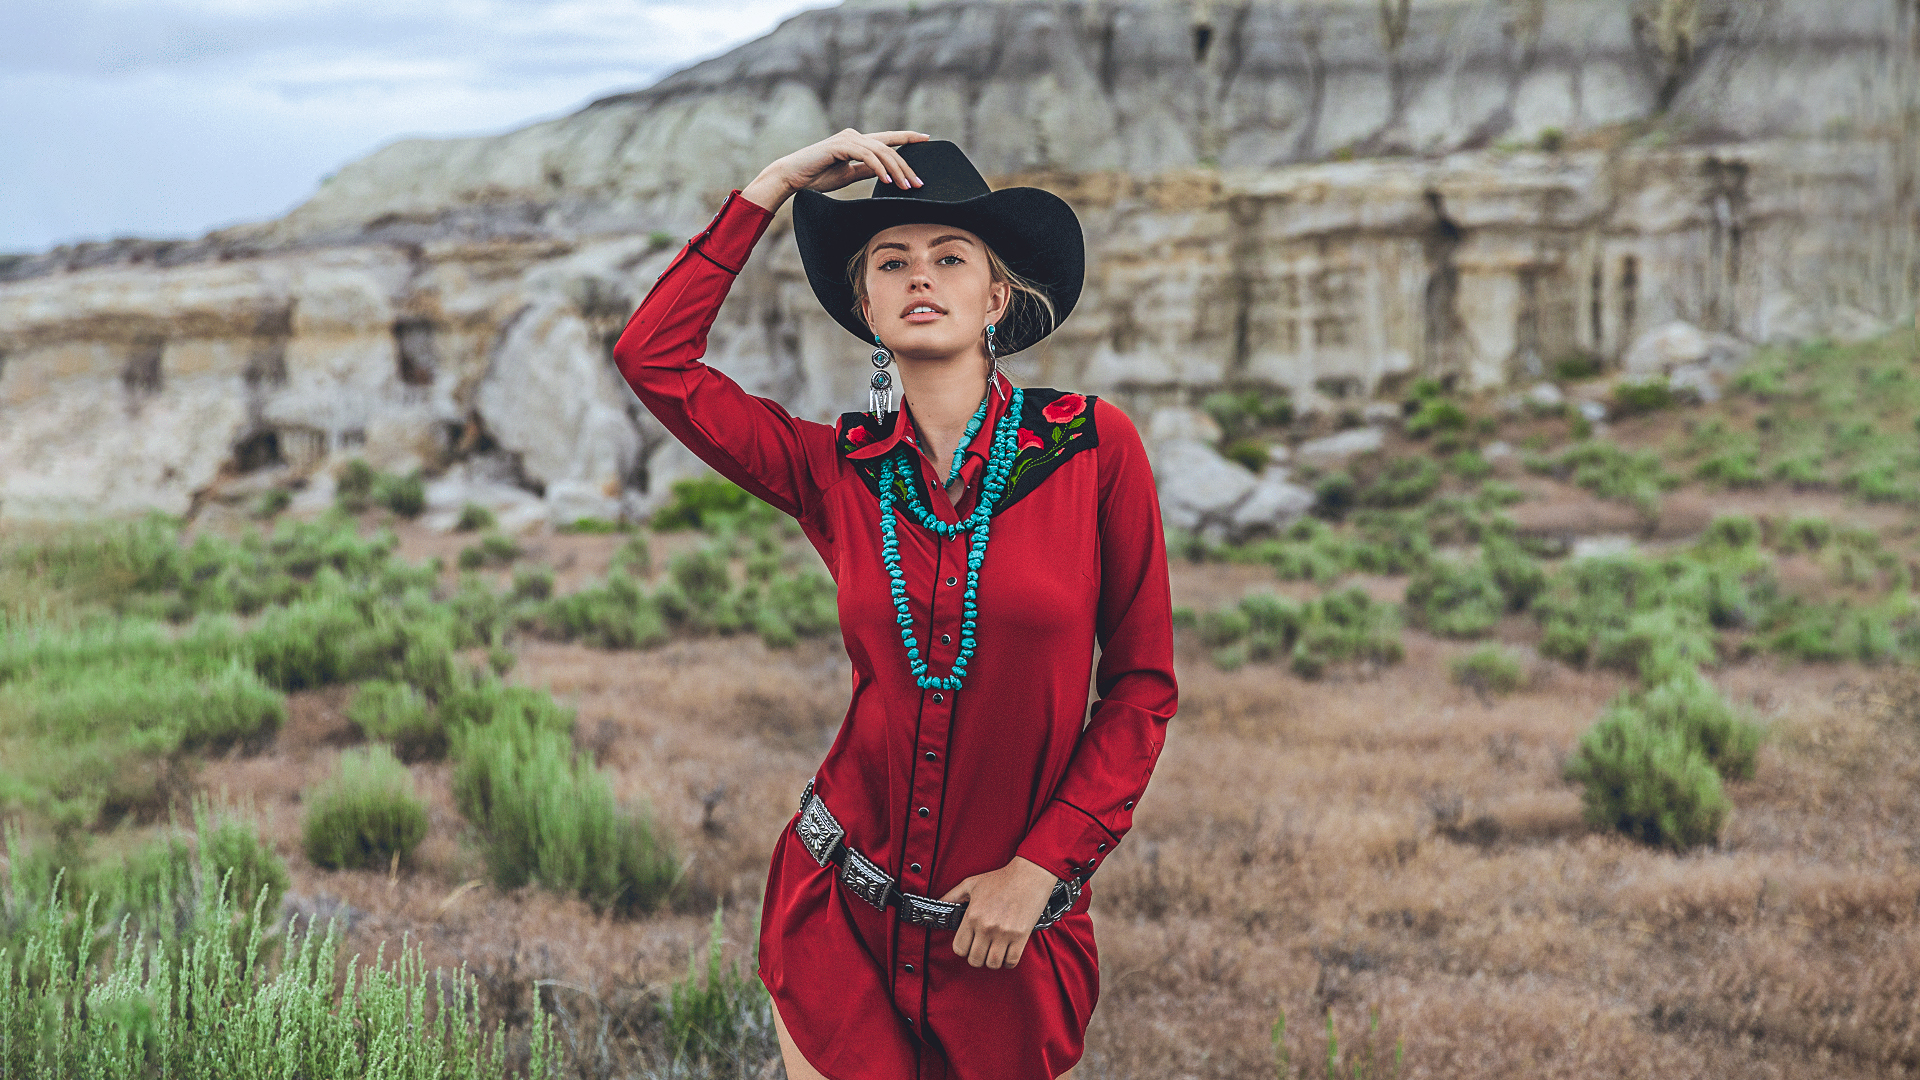 People 1920x1080 Taylor Howard women model cowboy hats necklace blonde outdoors rock formation frontal view depth of field red shirt